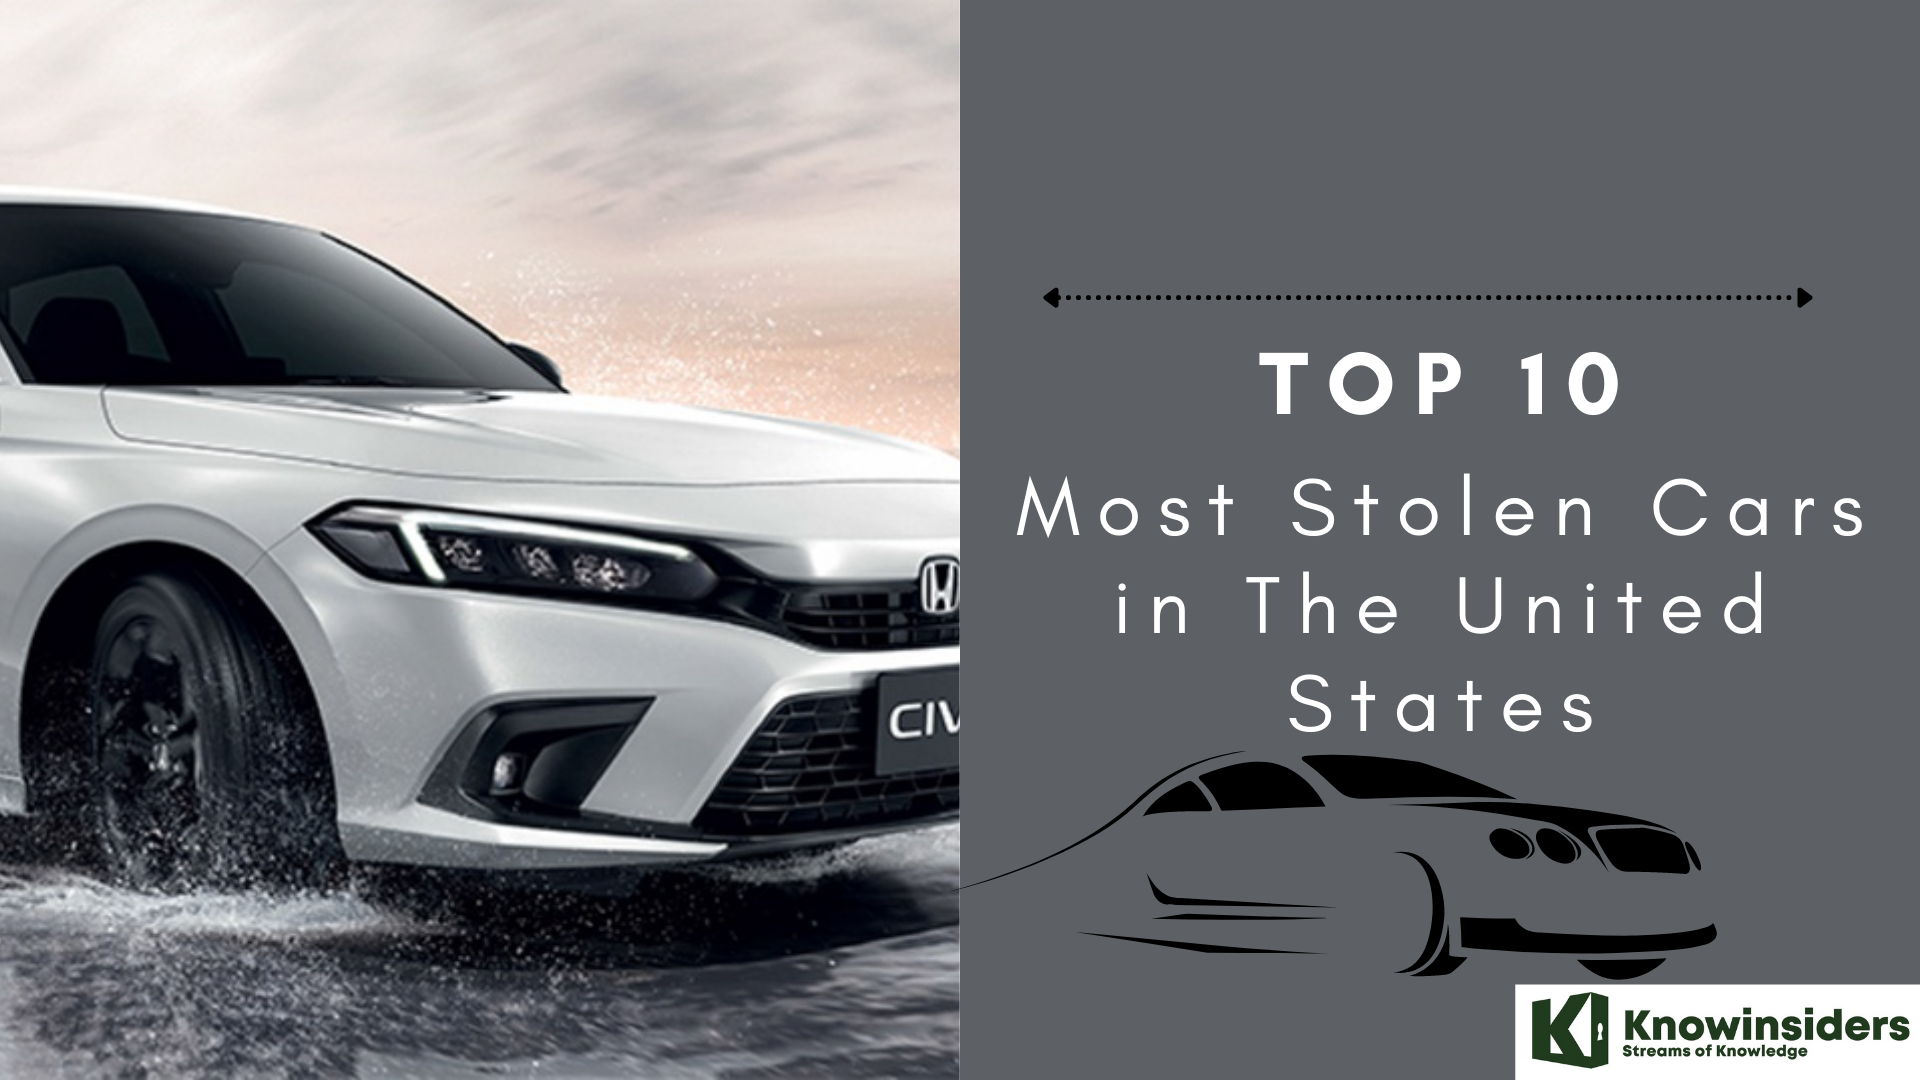 Top 10 Most Stolen Cars in the U.S You Should Be Careful